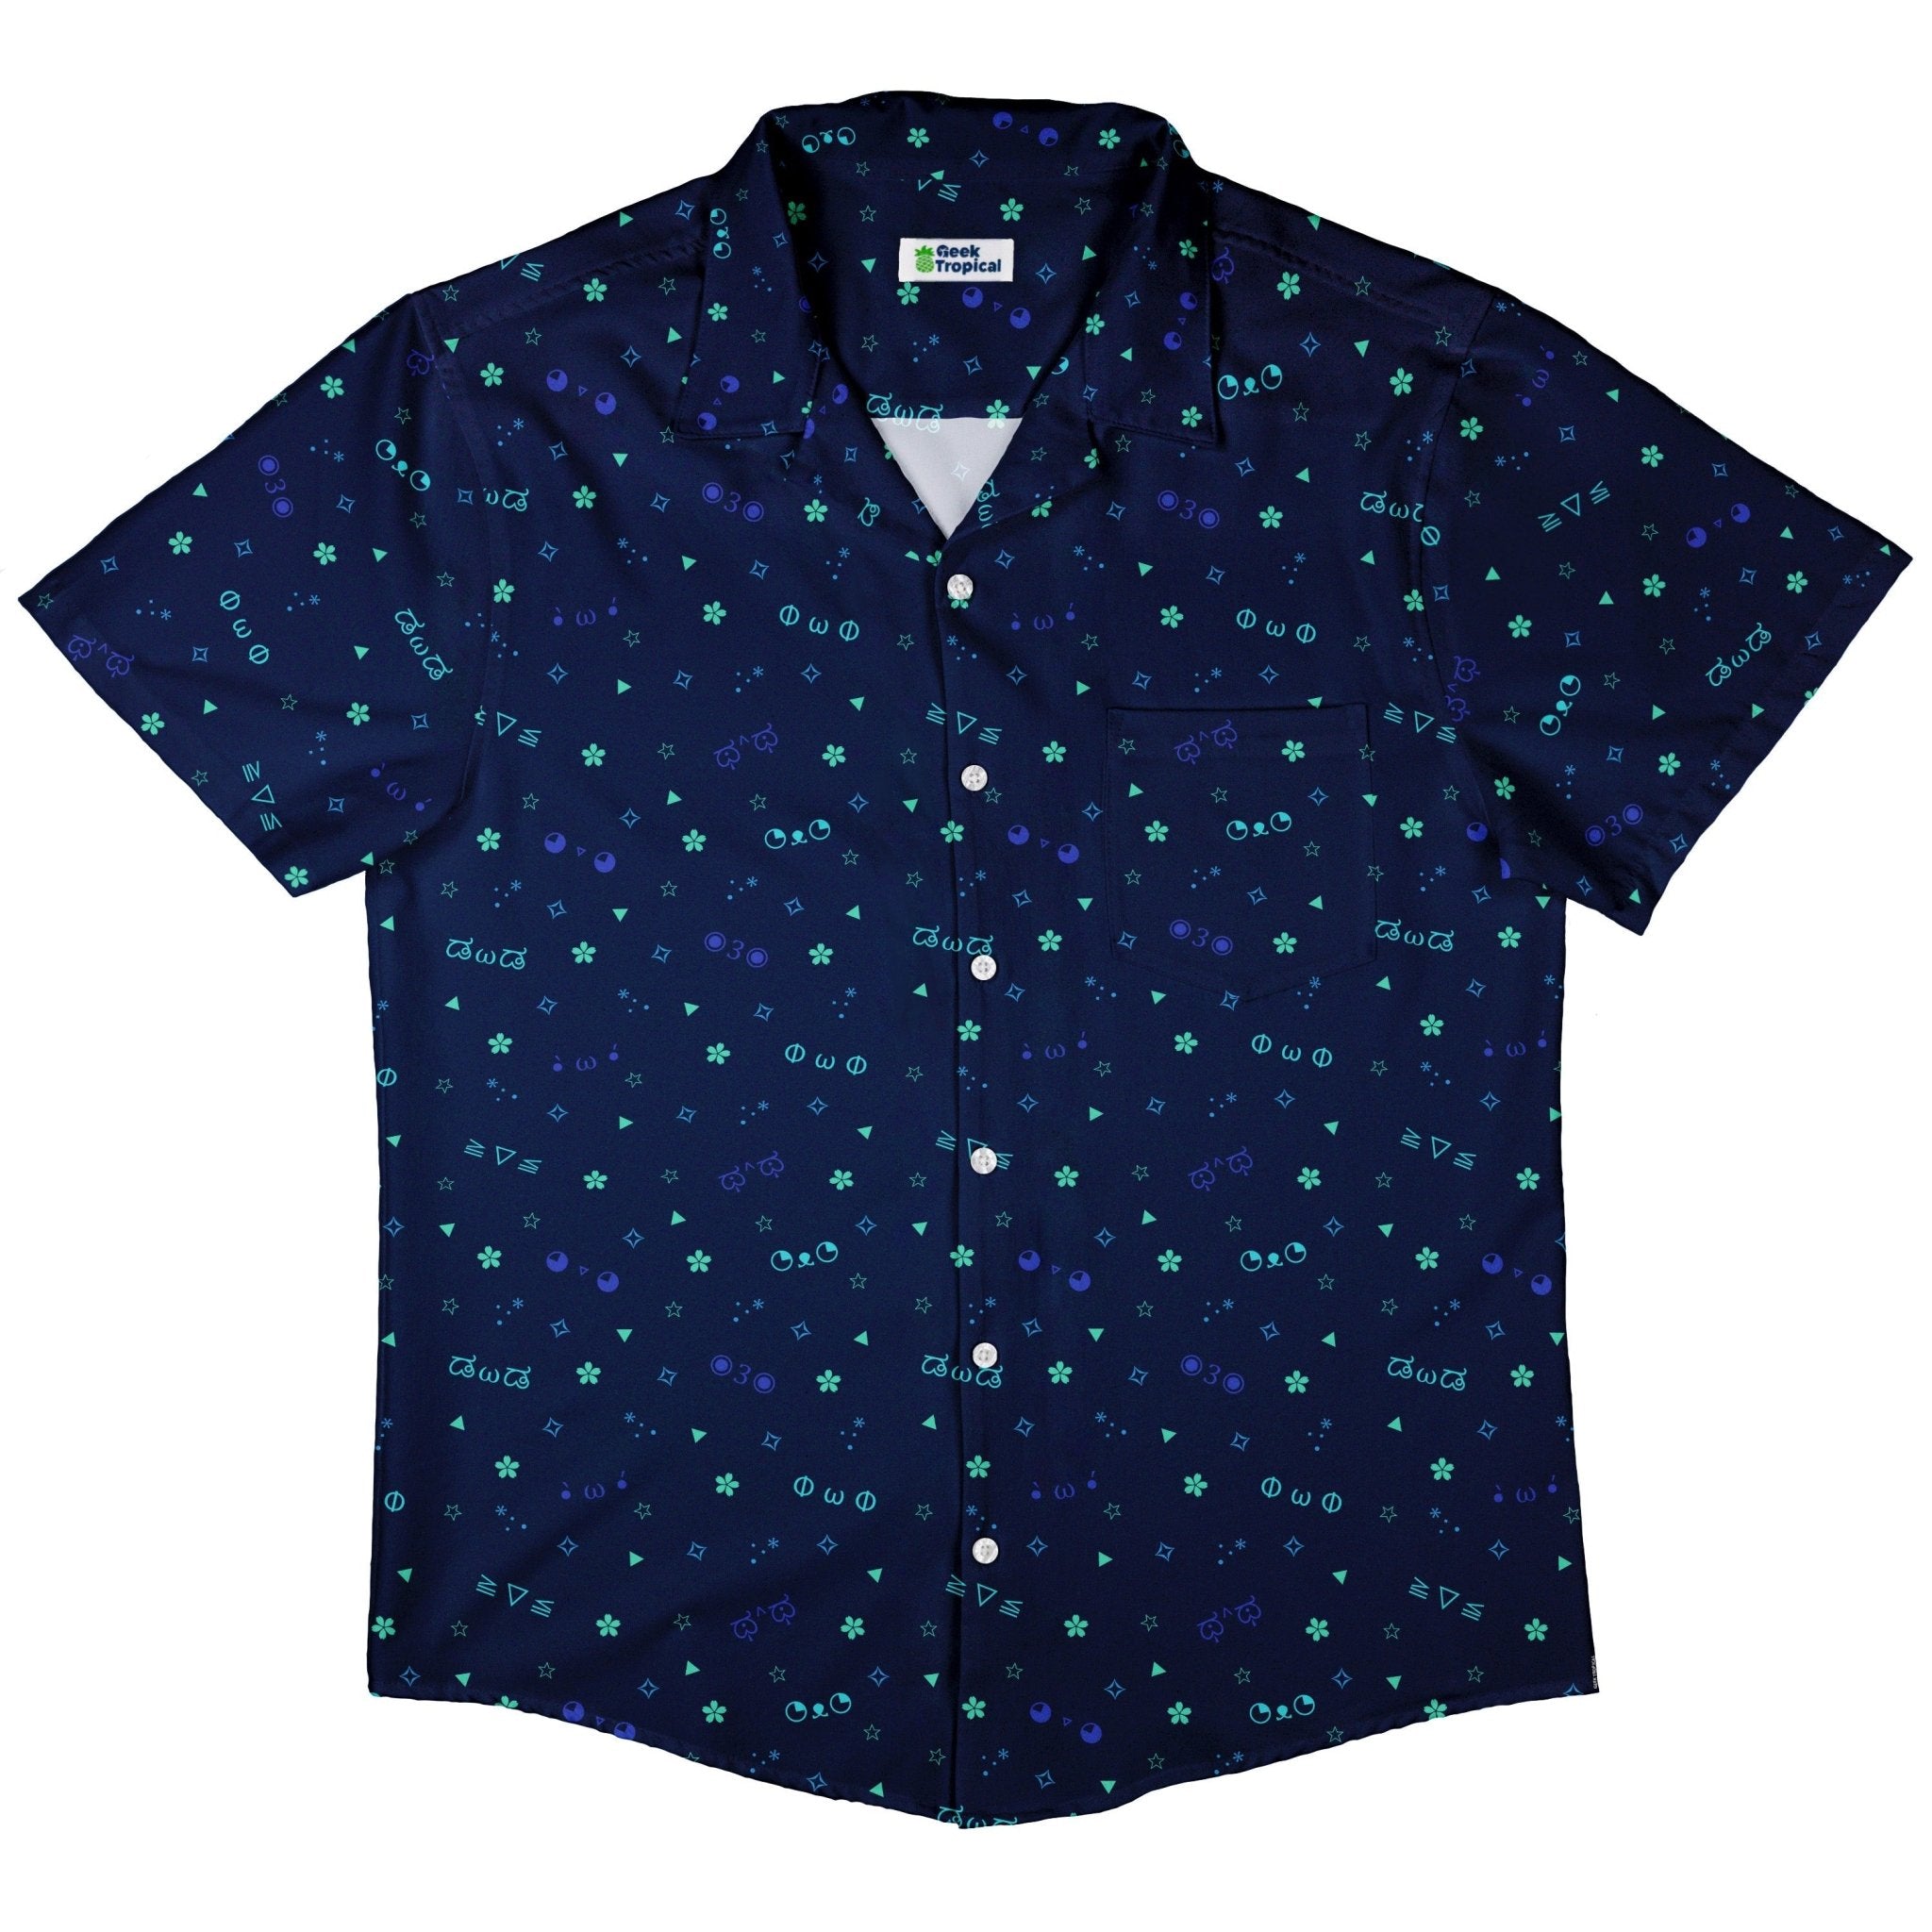 Kao Emojis Blue Button Up Shirt - adult sizing - Anime - Design by Ardi Tong